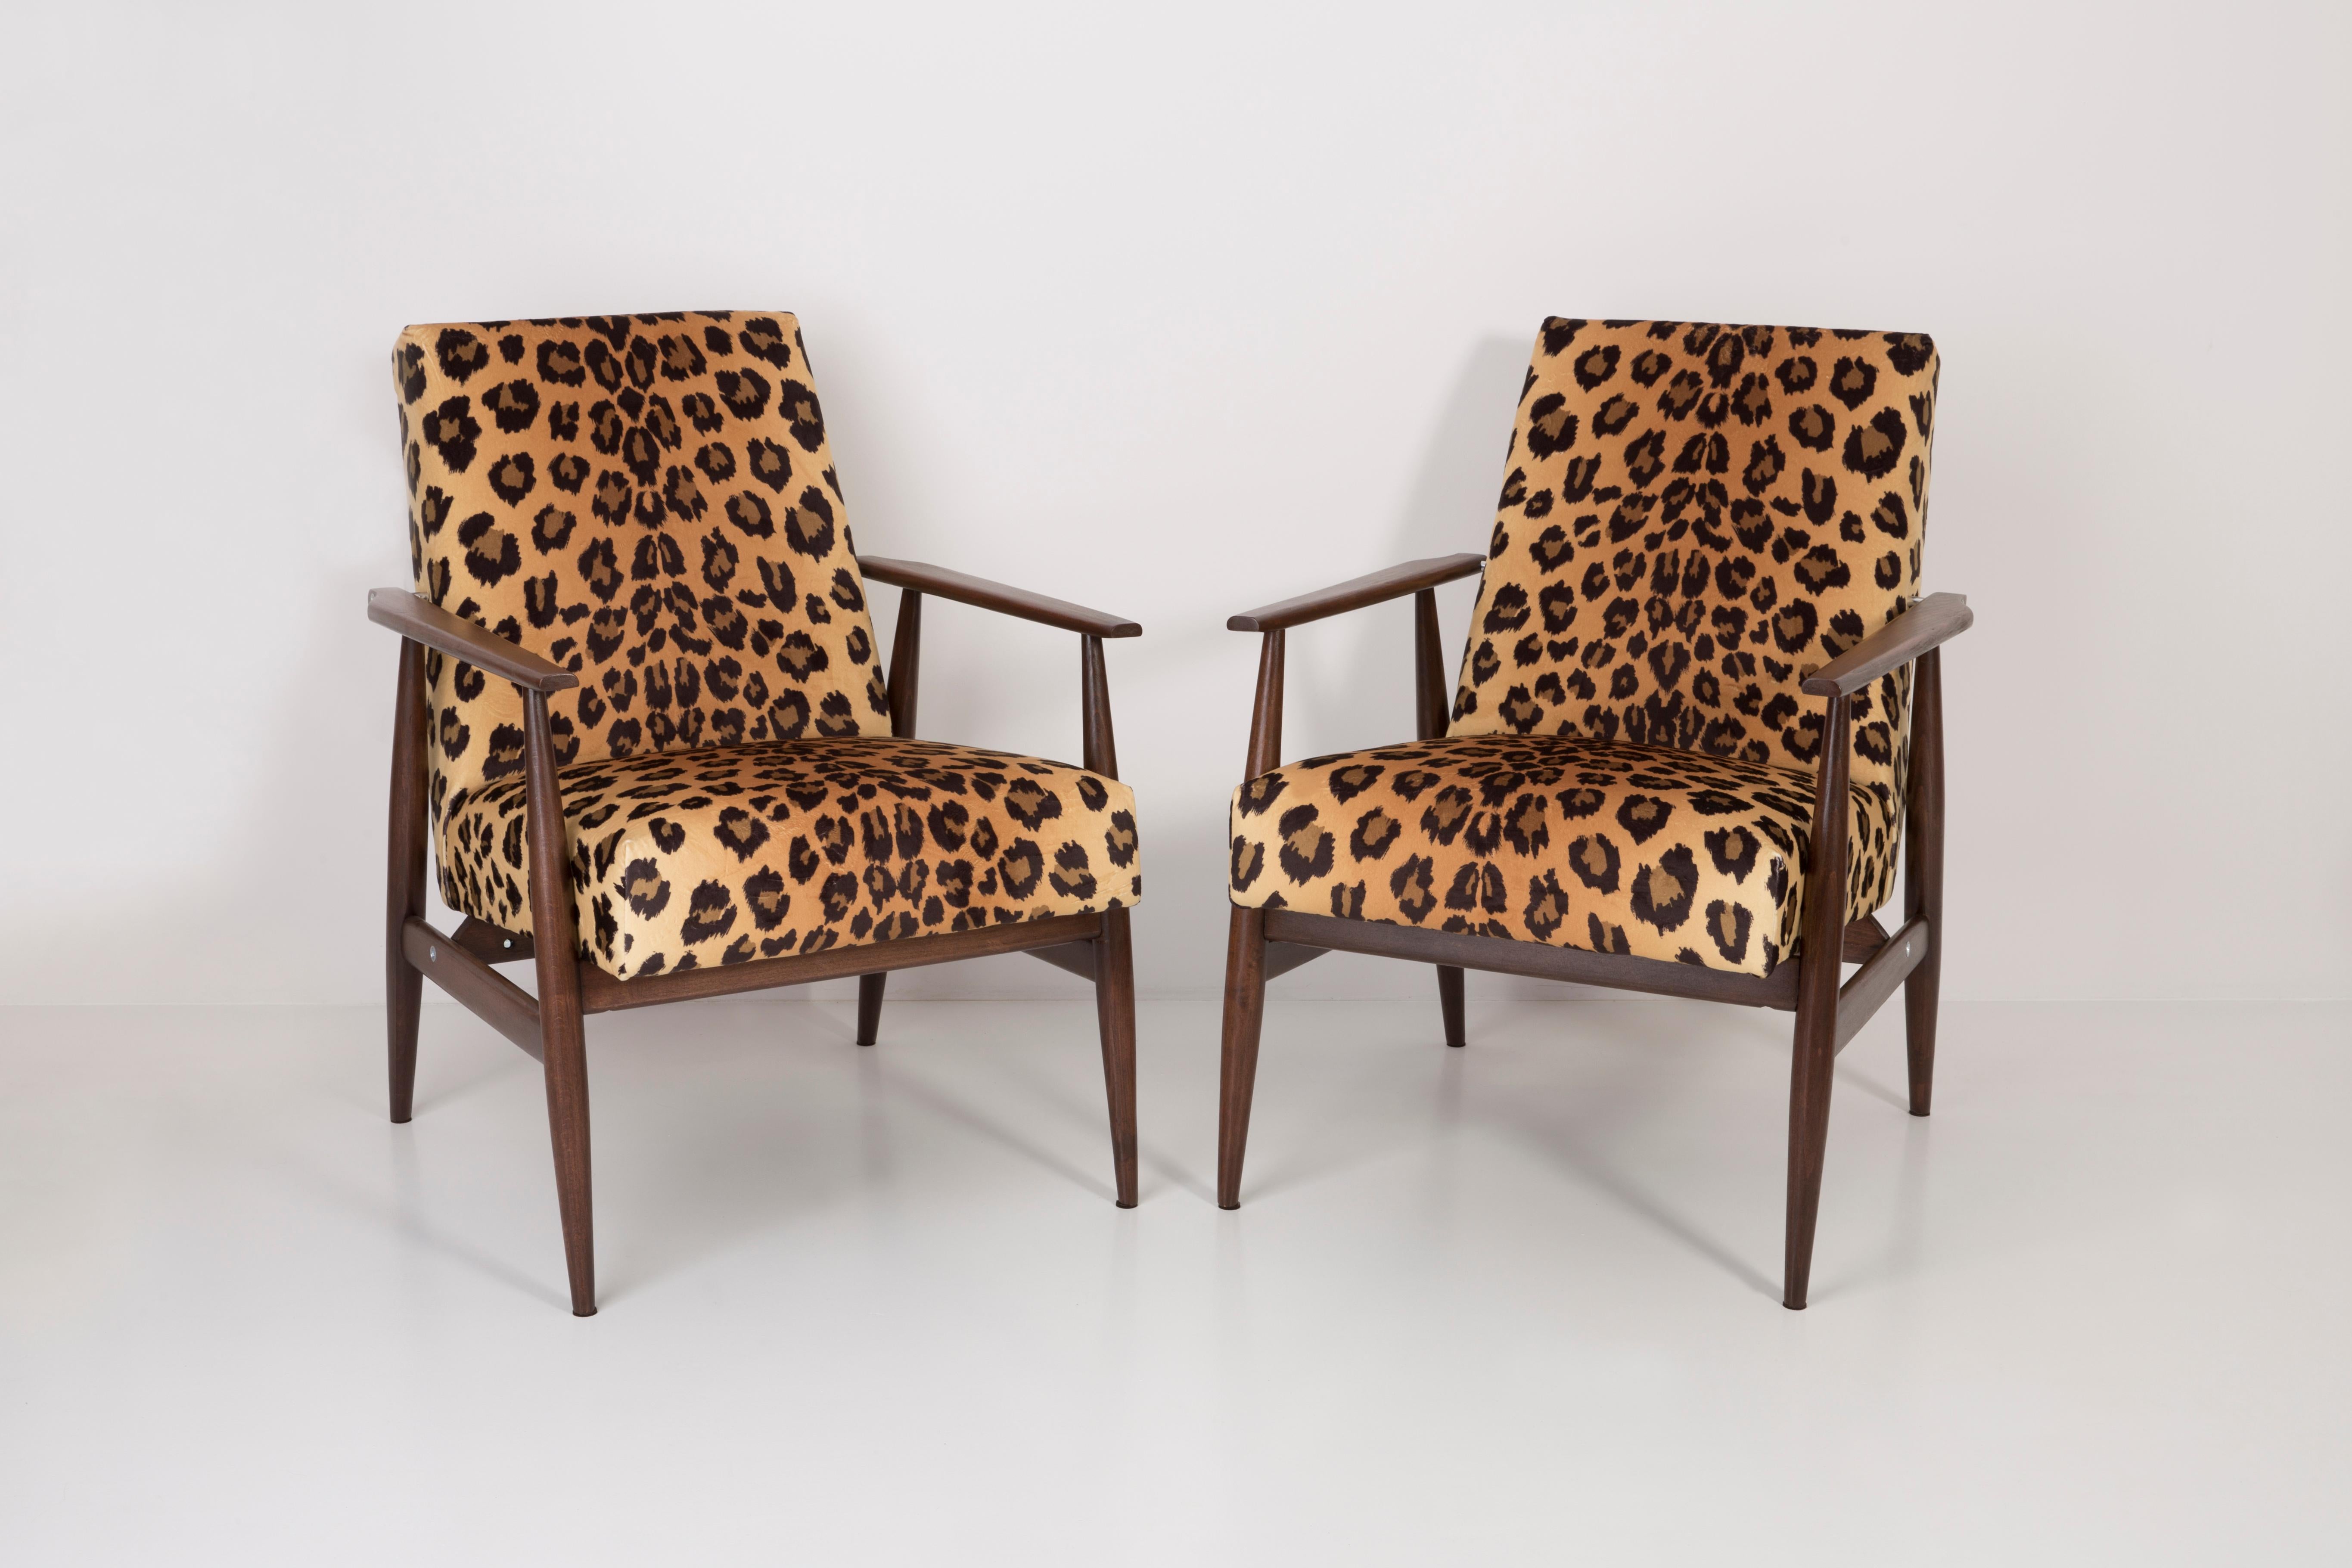 Hand-Crafted Midcentury Leopard Print Velvet Dante Armchair, H. Lis, 1960s For Sale